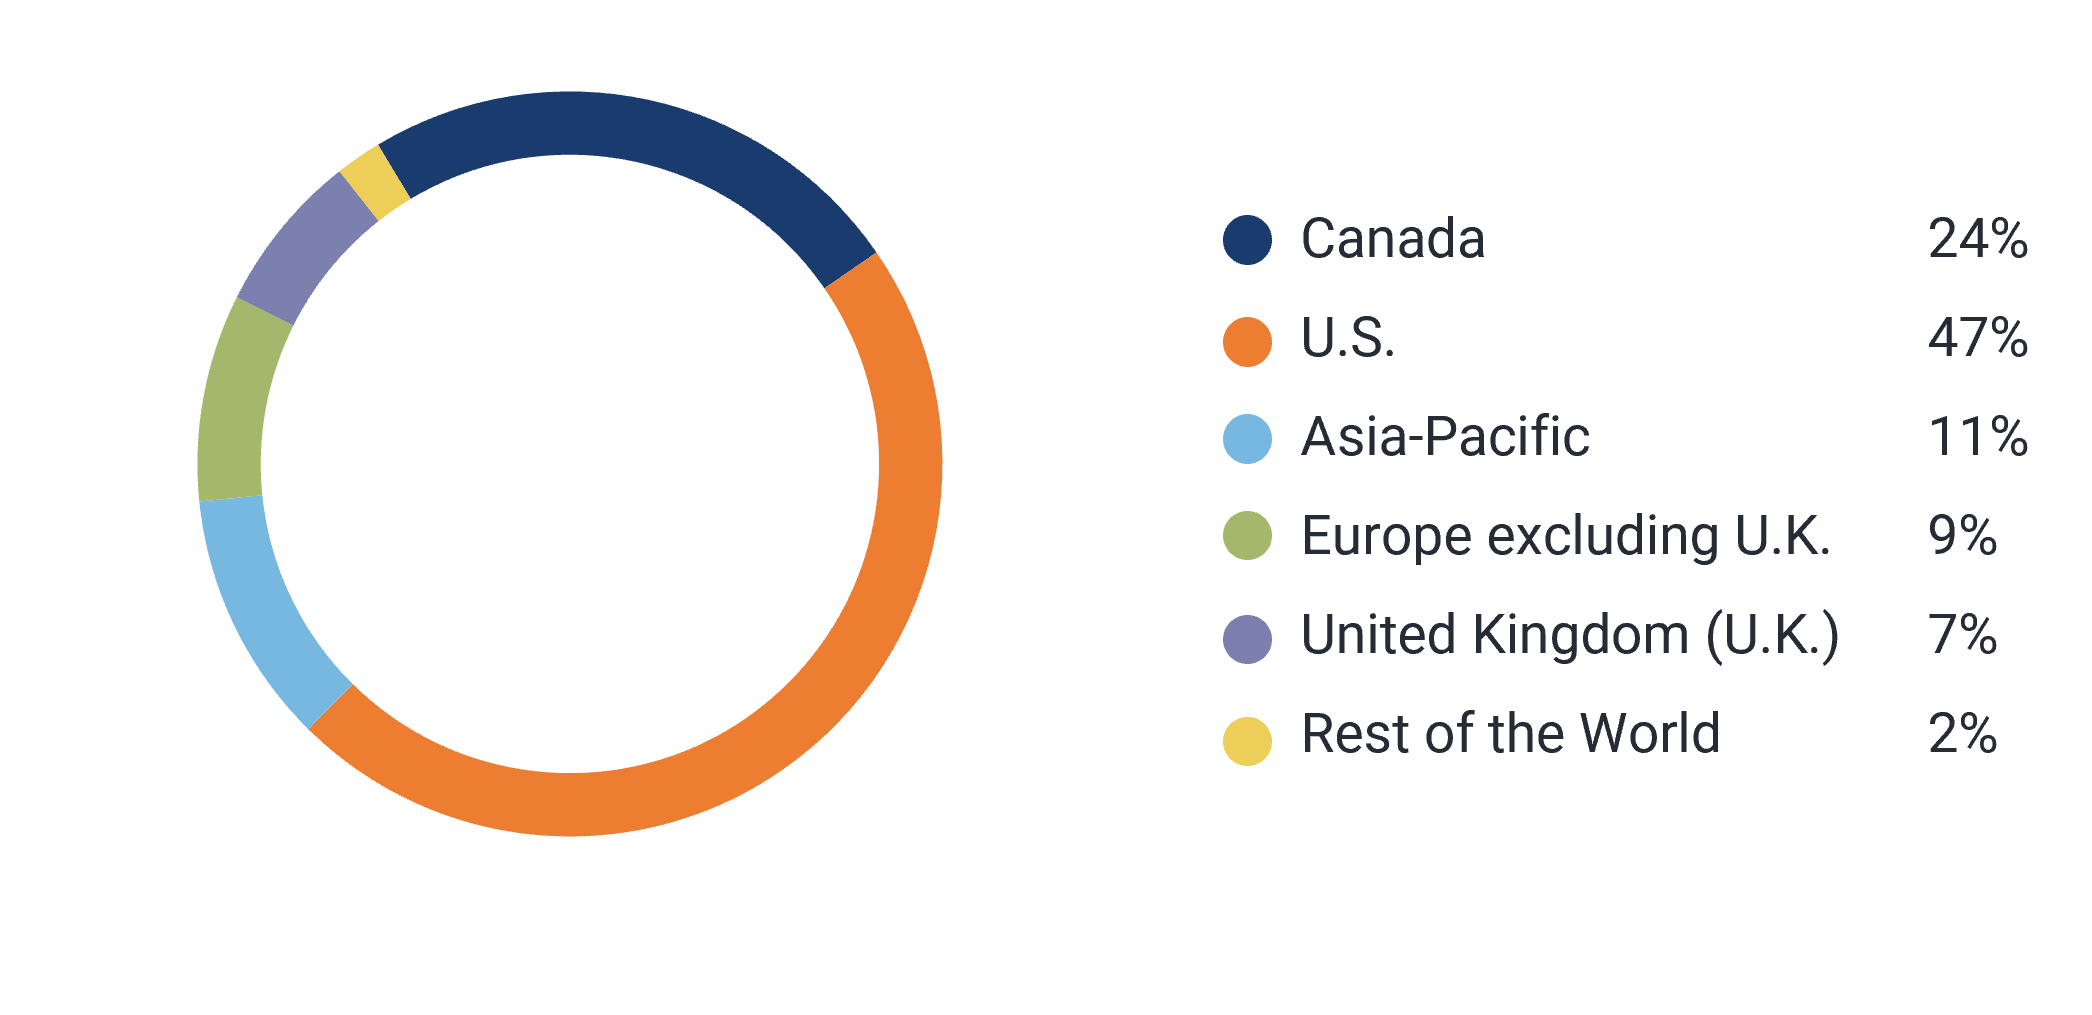 Geographic diversification - 24% Canada, 47% United States, 11% Asia-Pacific, 9% Europe excluding U.K., 7% United Kingdom (U.K.), 2% Rest of the World